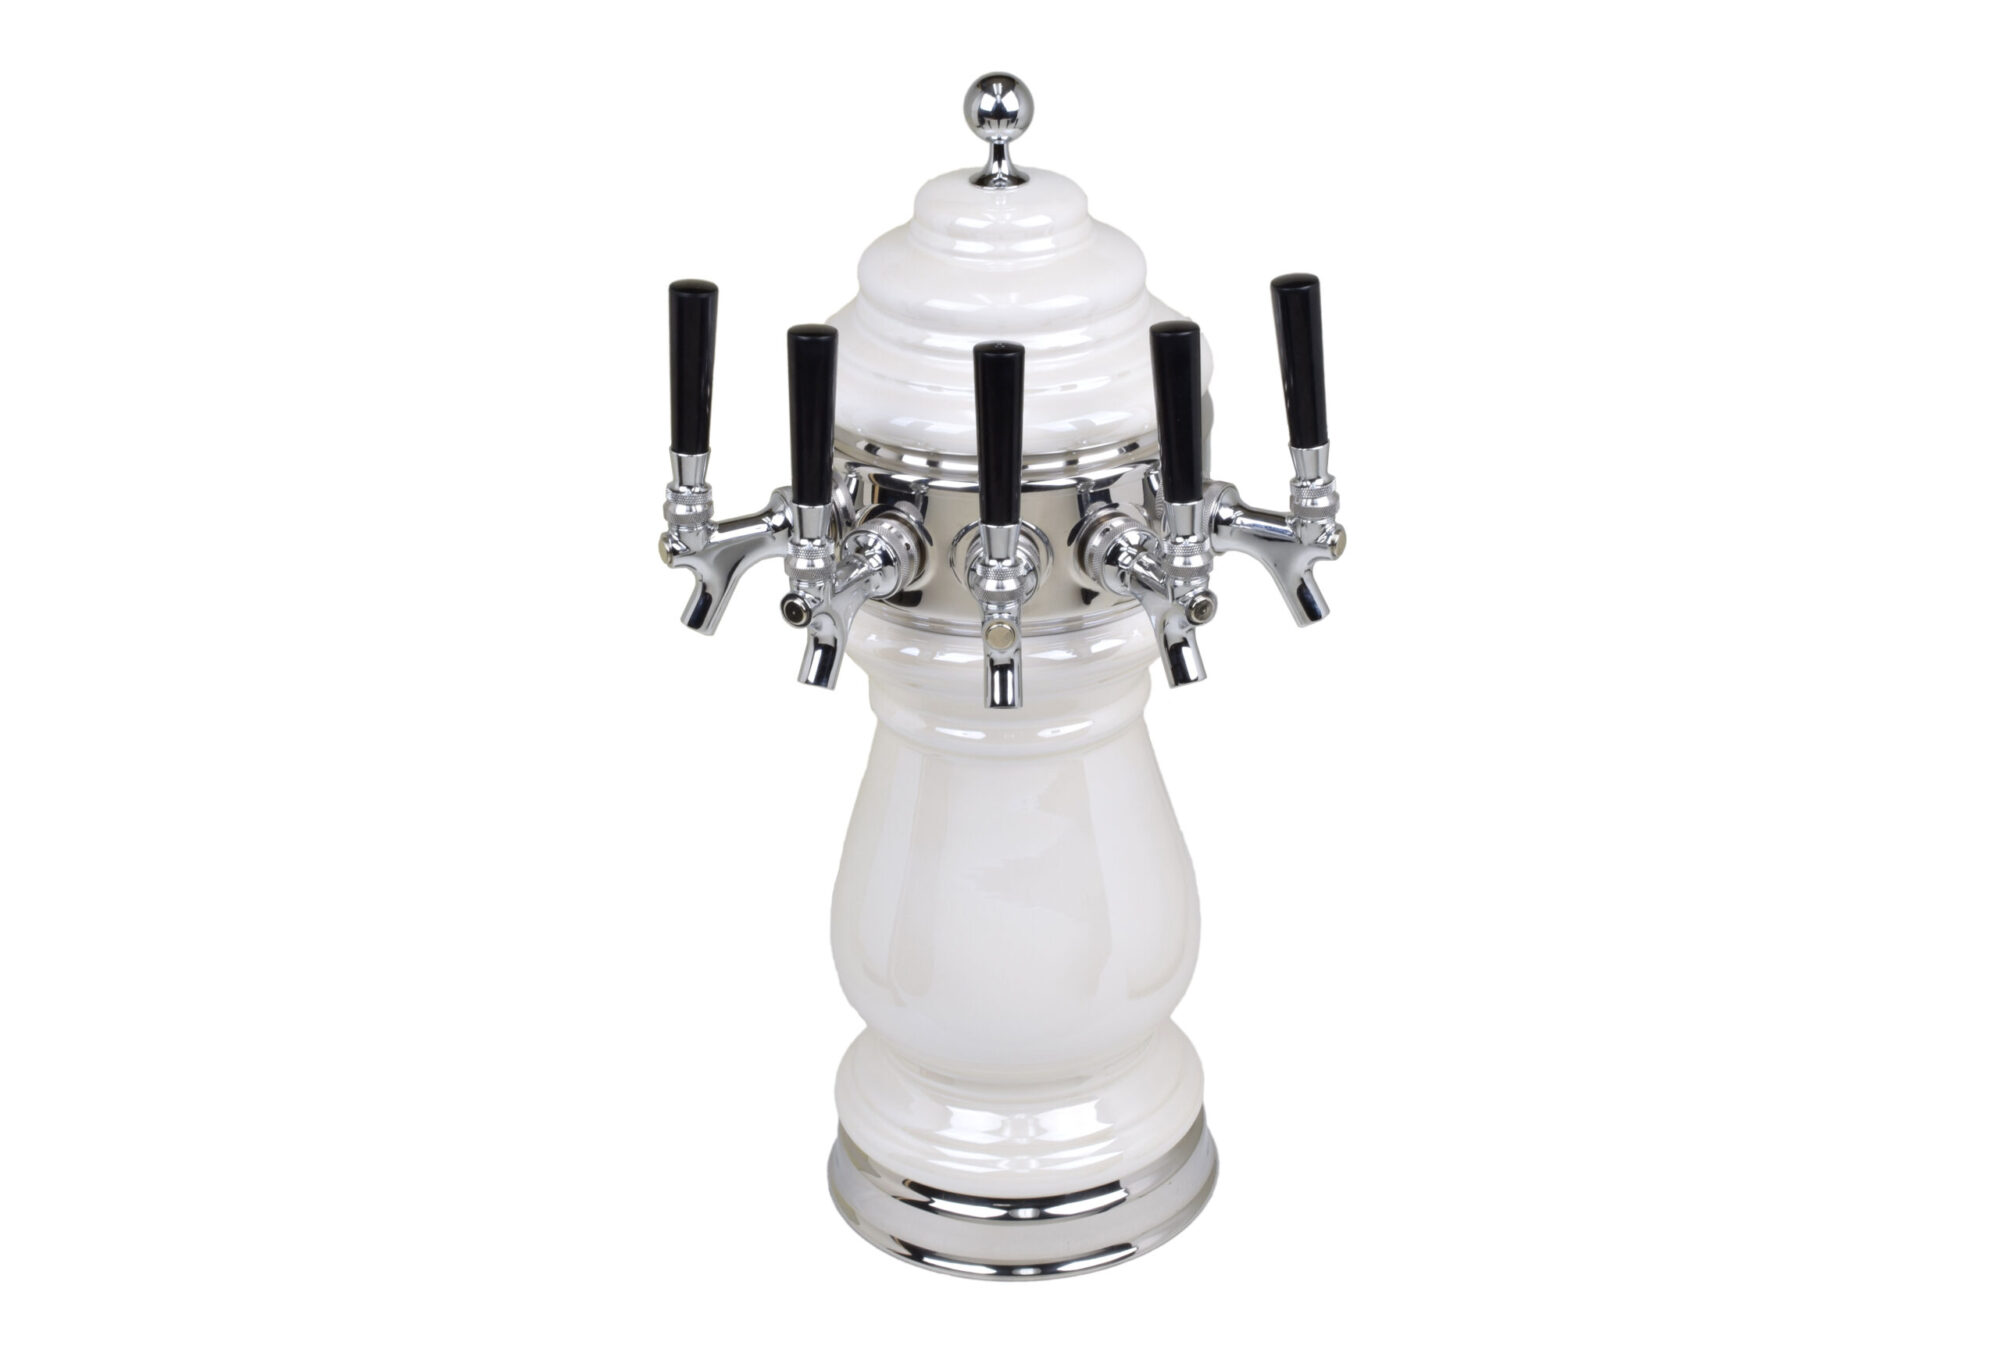 882C-5PW Five Faucet Ceramic Tower with Chrome Plated Hardware - Available in 5 Colors - Shown in Pearl White